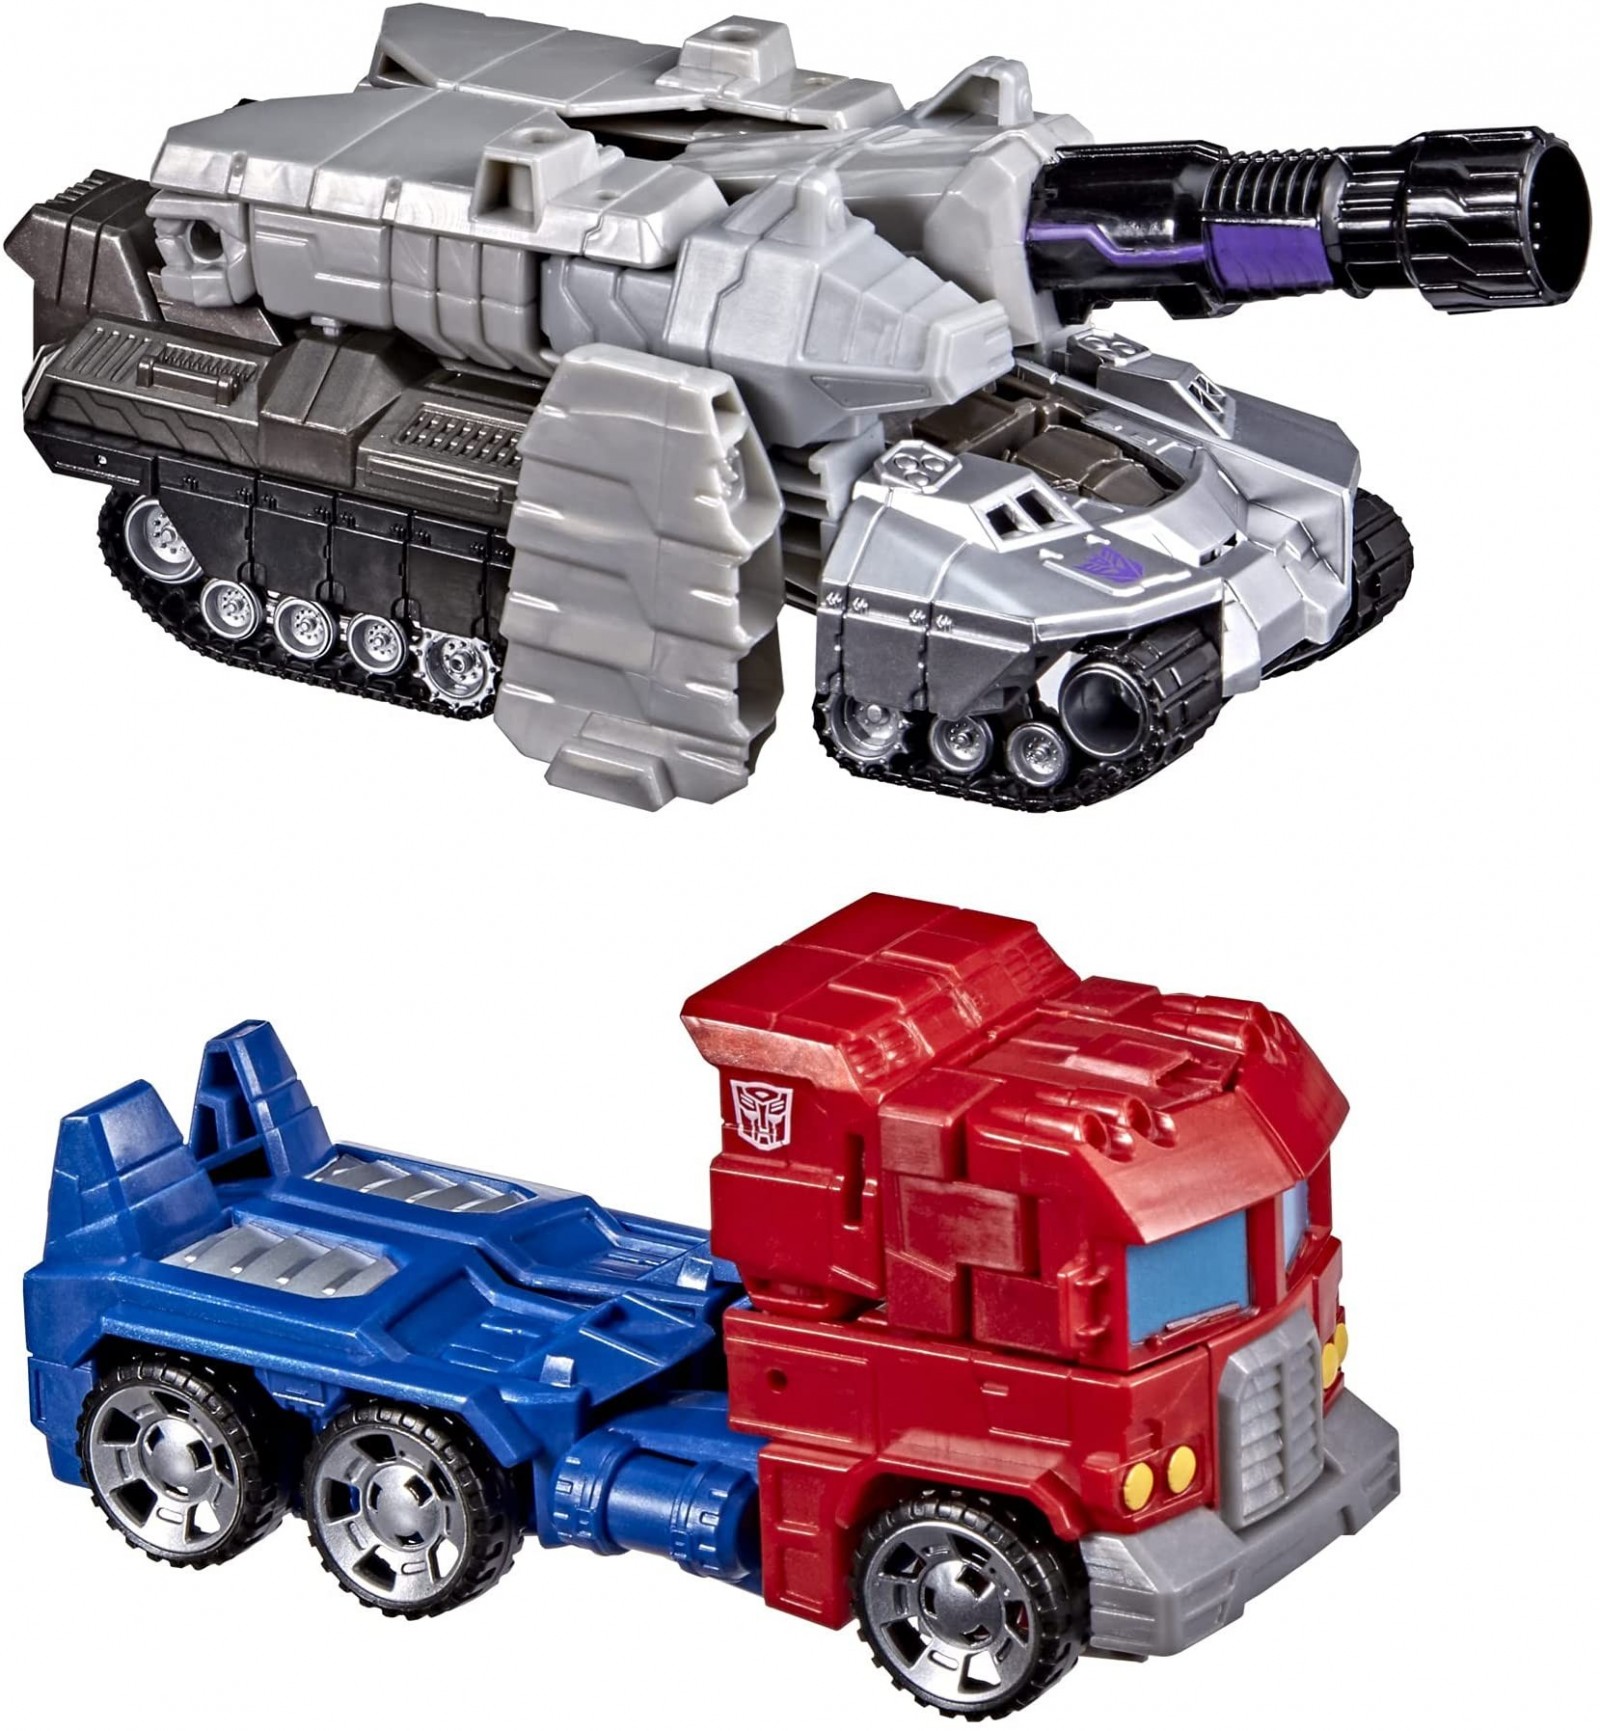 Transformers News: Amazon will have Transformers Cyber Battalion 2 packs Available Soon